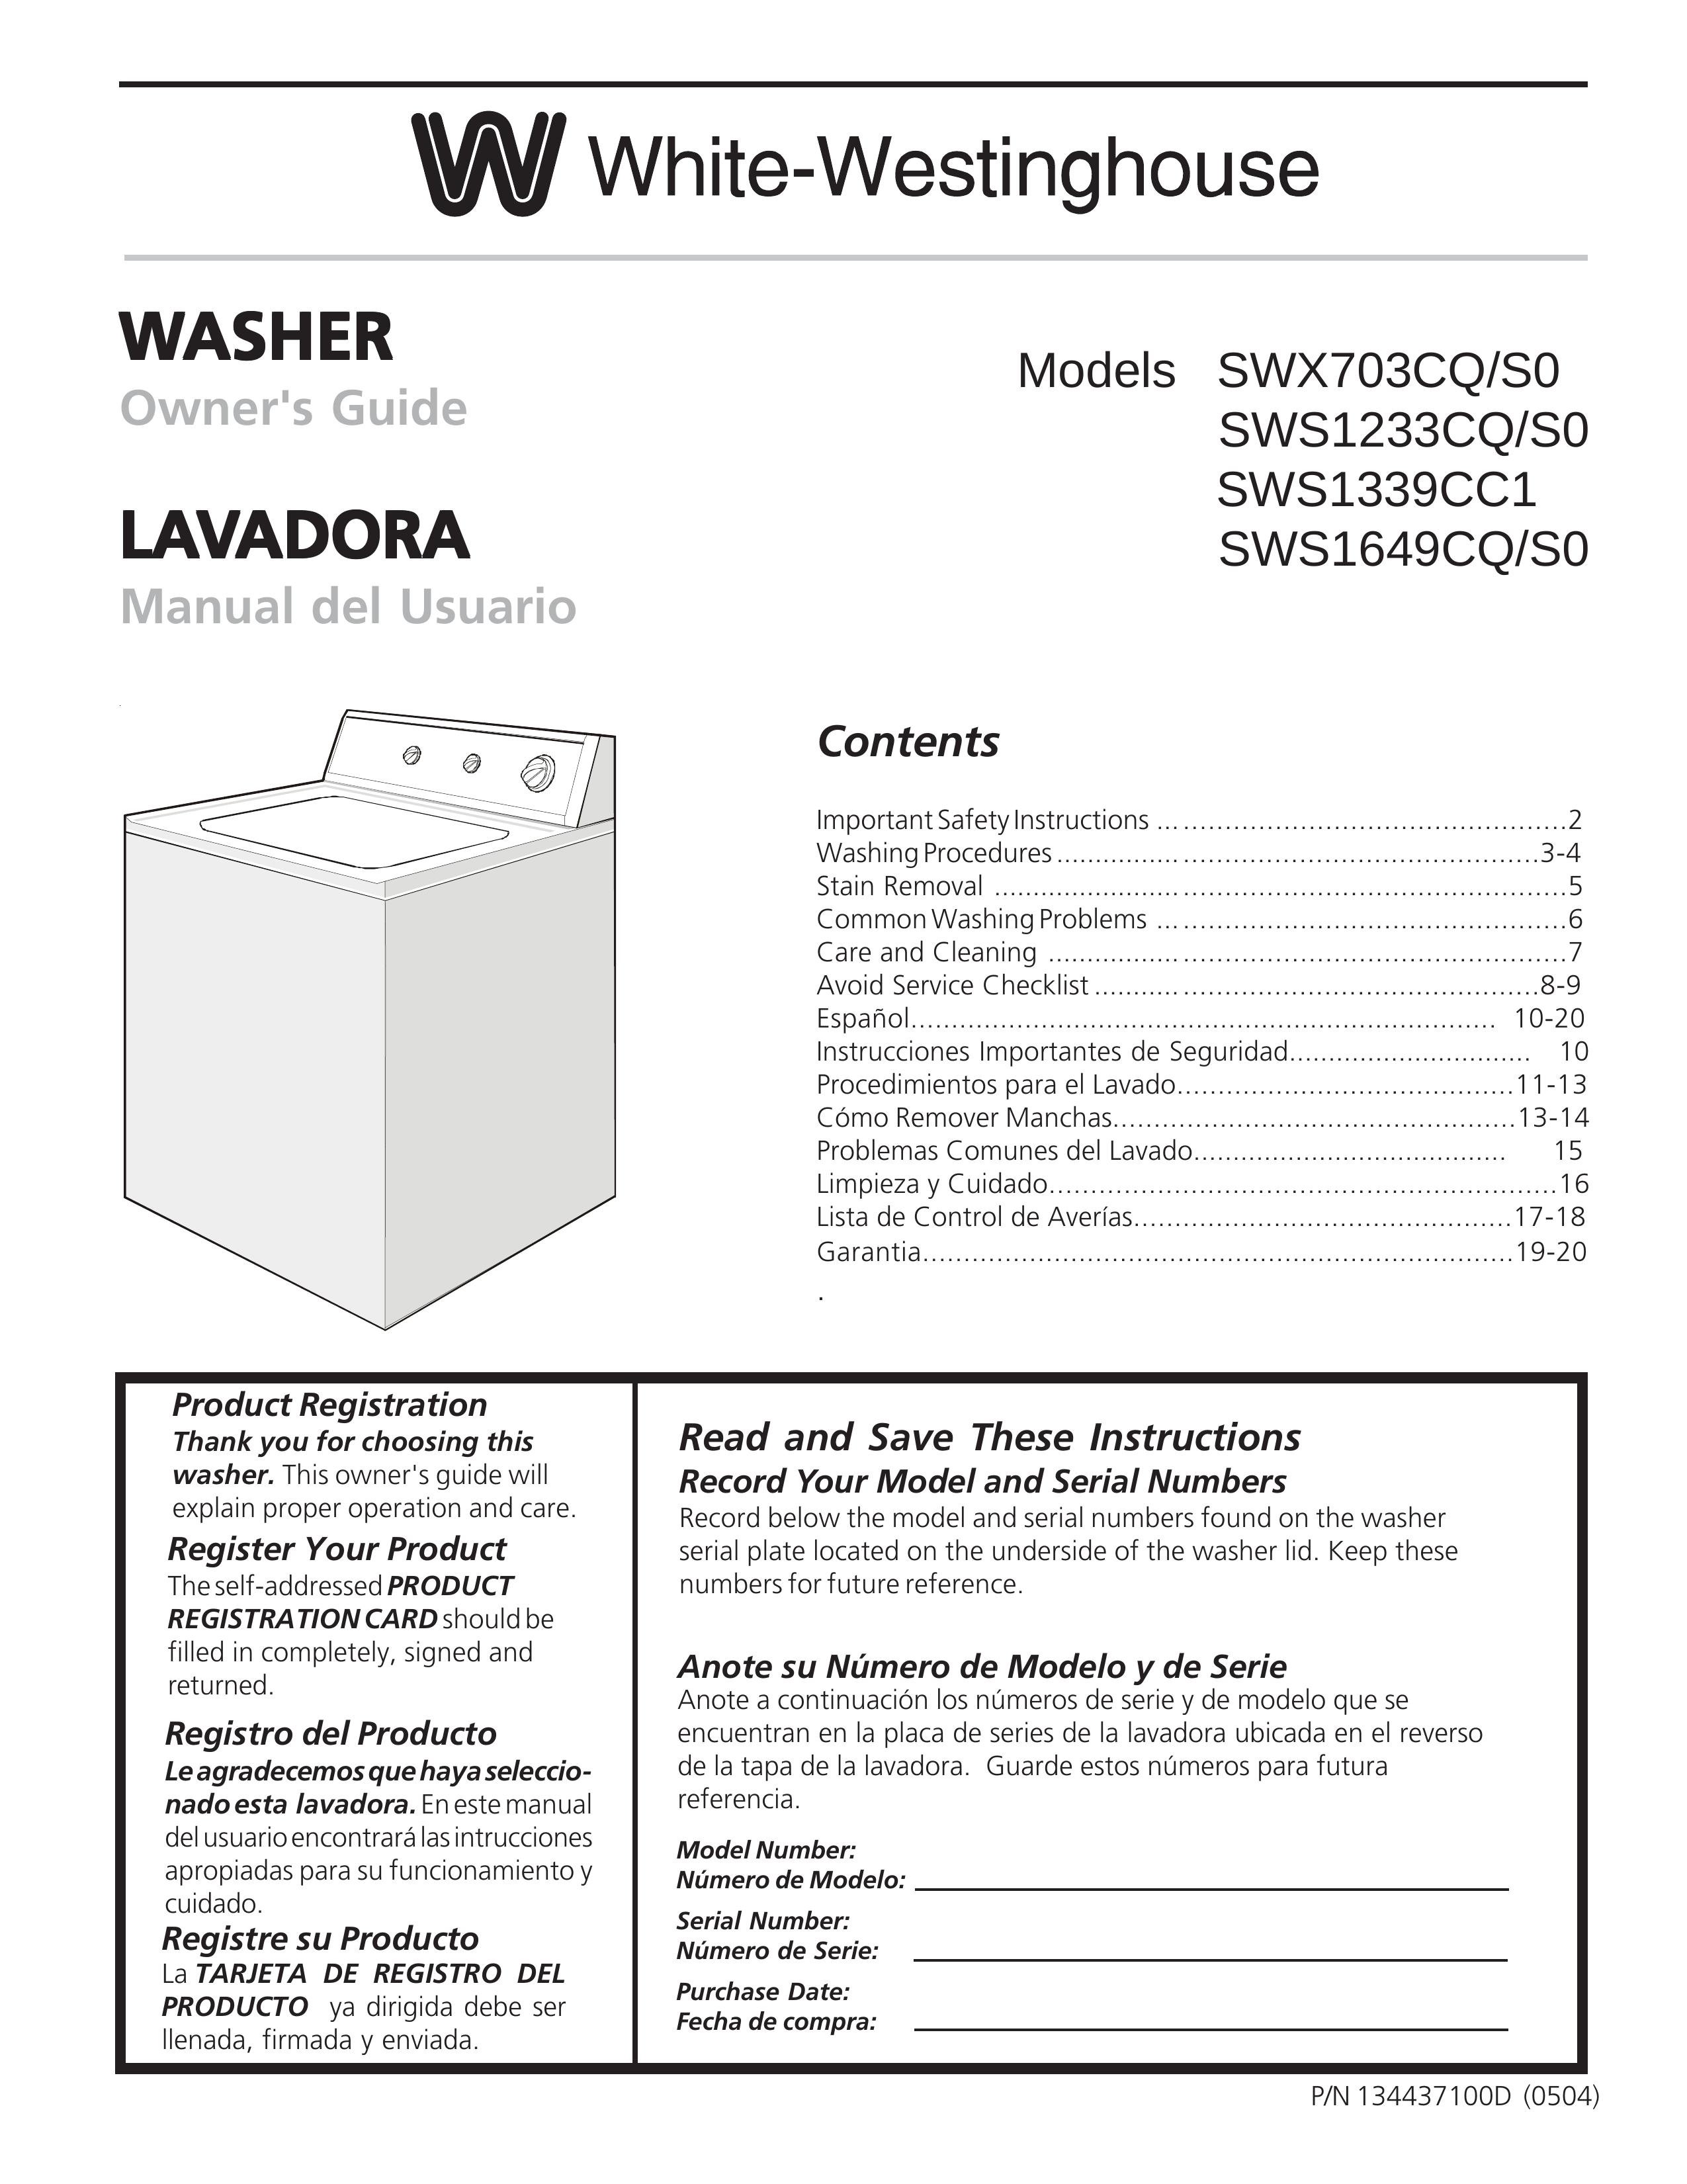 White-Westinghouse SWS1649CQ/S0 Washer User Manual